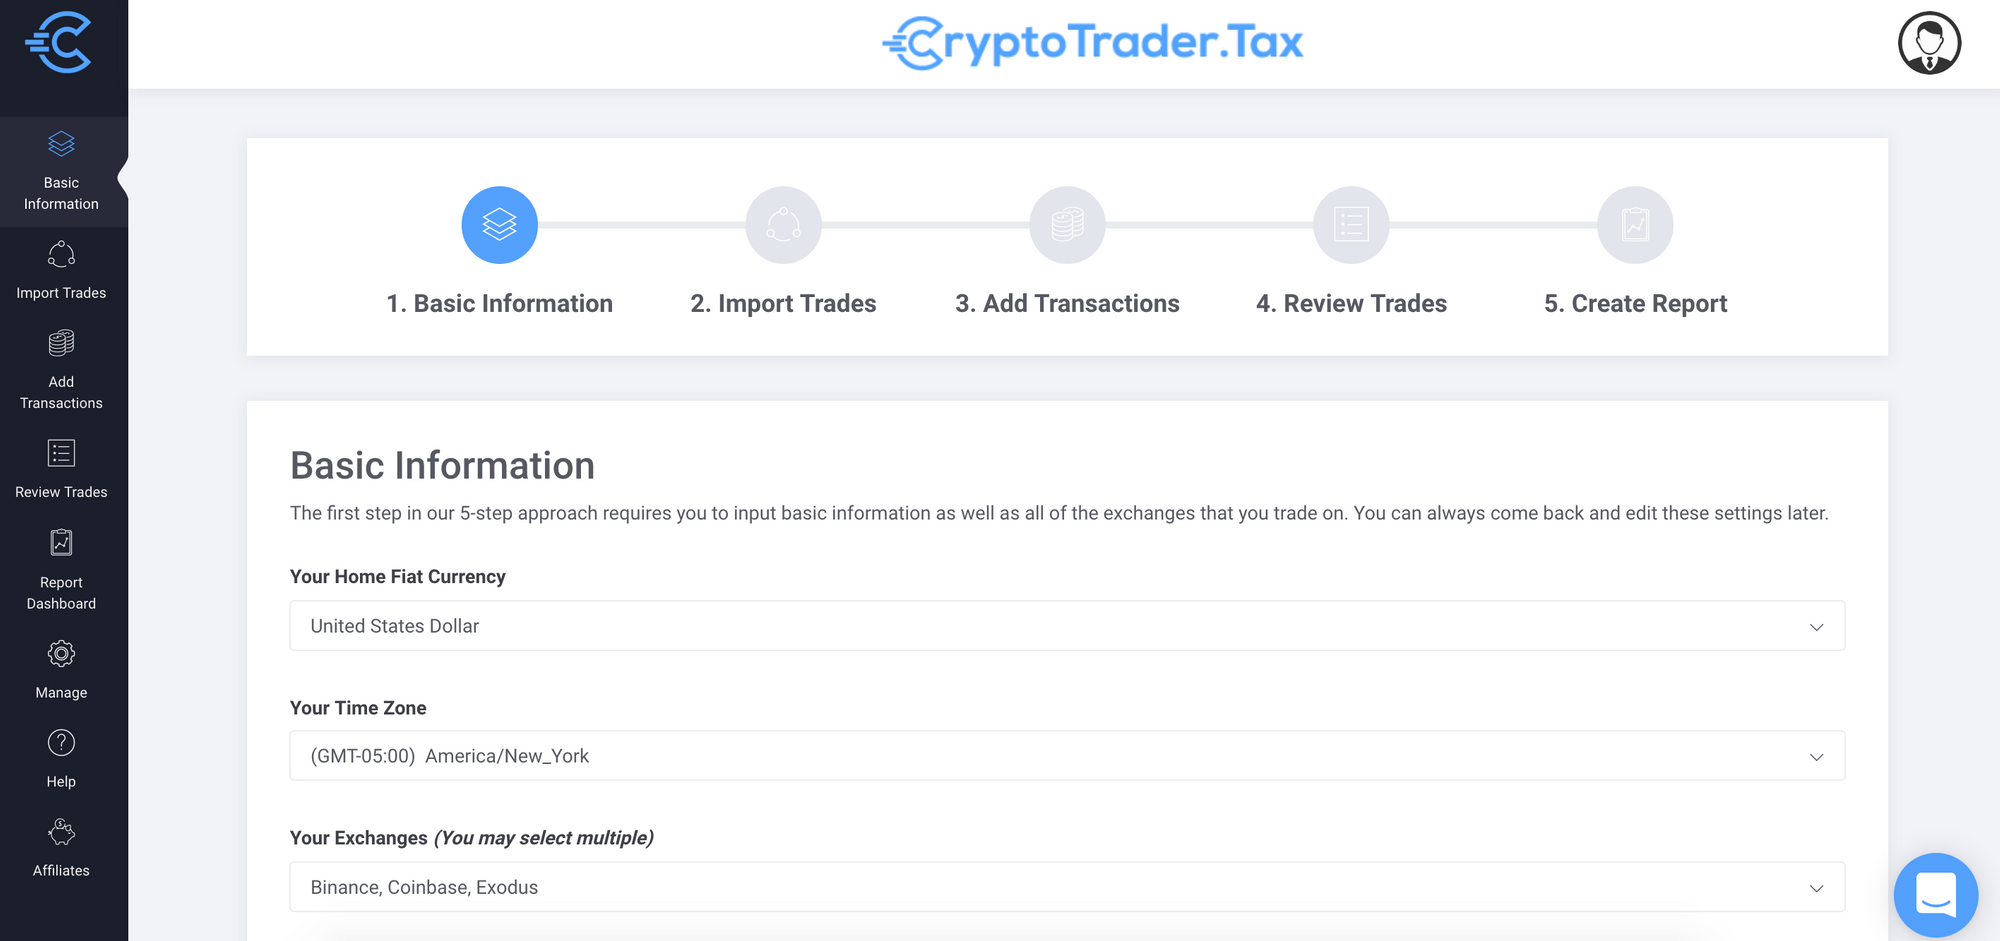 Cryptocurrency Taxes: CryptoTrader.Tax vs. CoinTracker